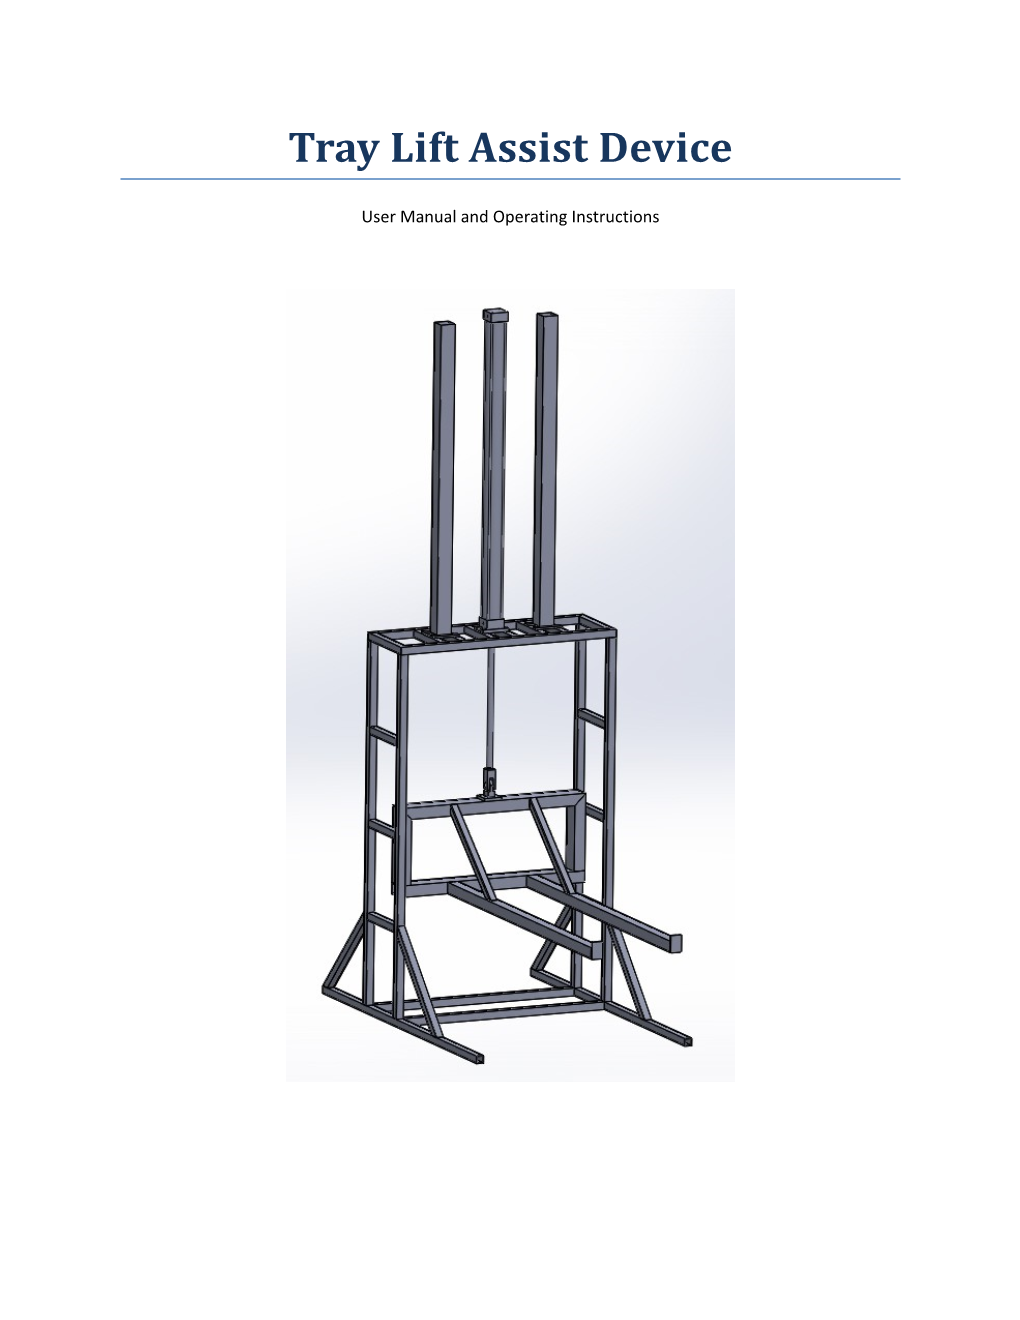 Tray Lift Assist Device